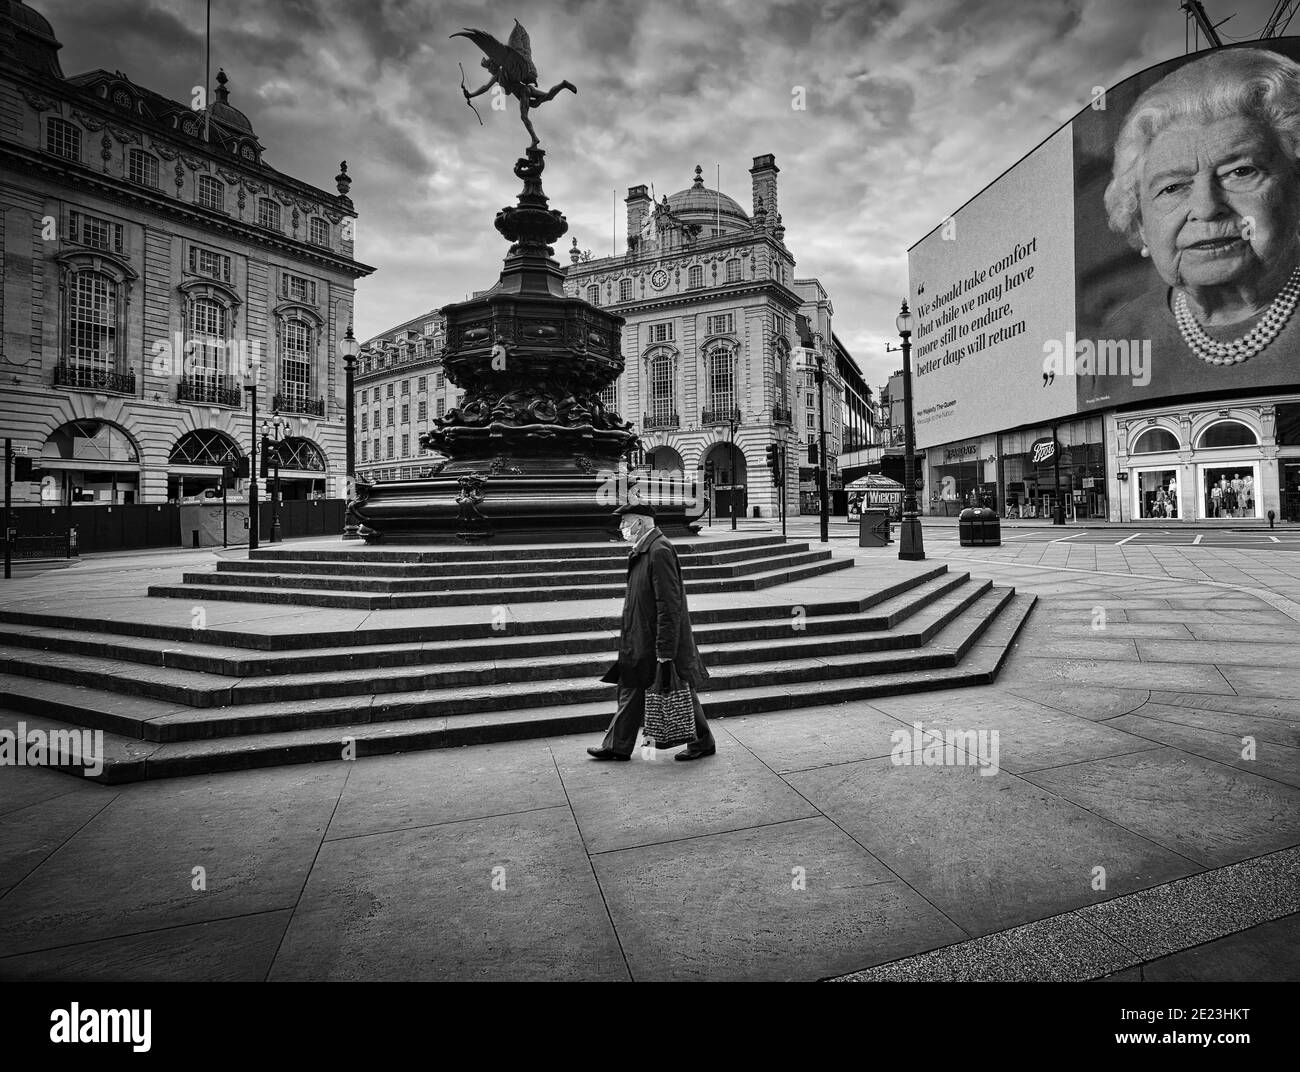 The Queens coronavirus speech illuminated on Piccadilly Circus billboard as UK lockdown continues.A man walks past empty Piccadilly Circus. Stock Photo